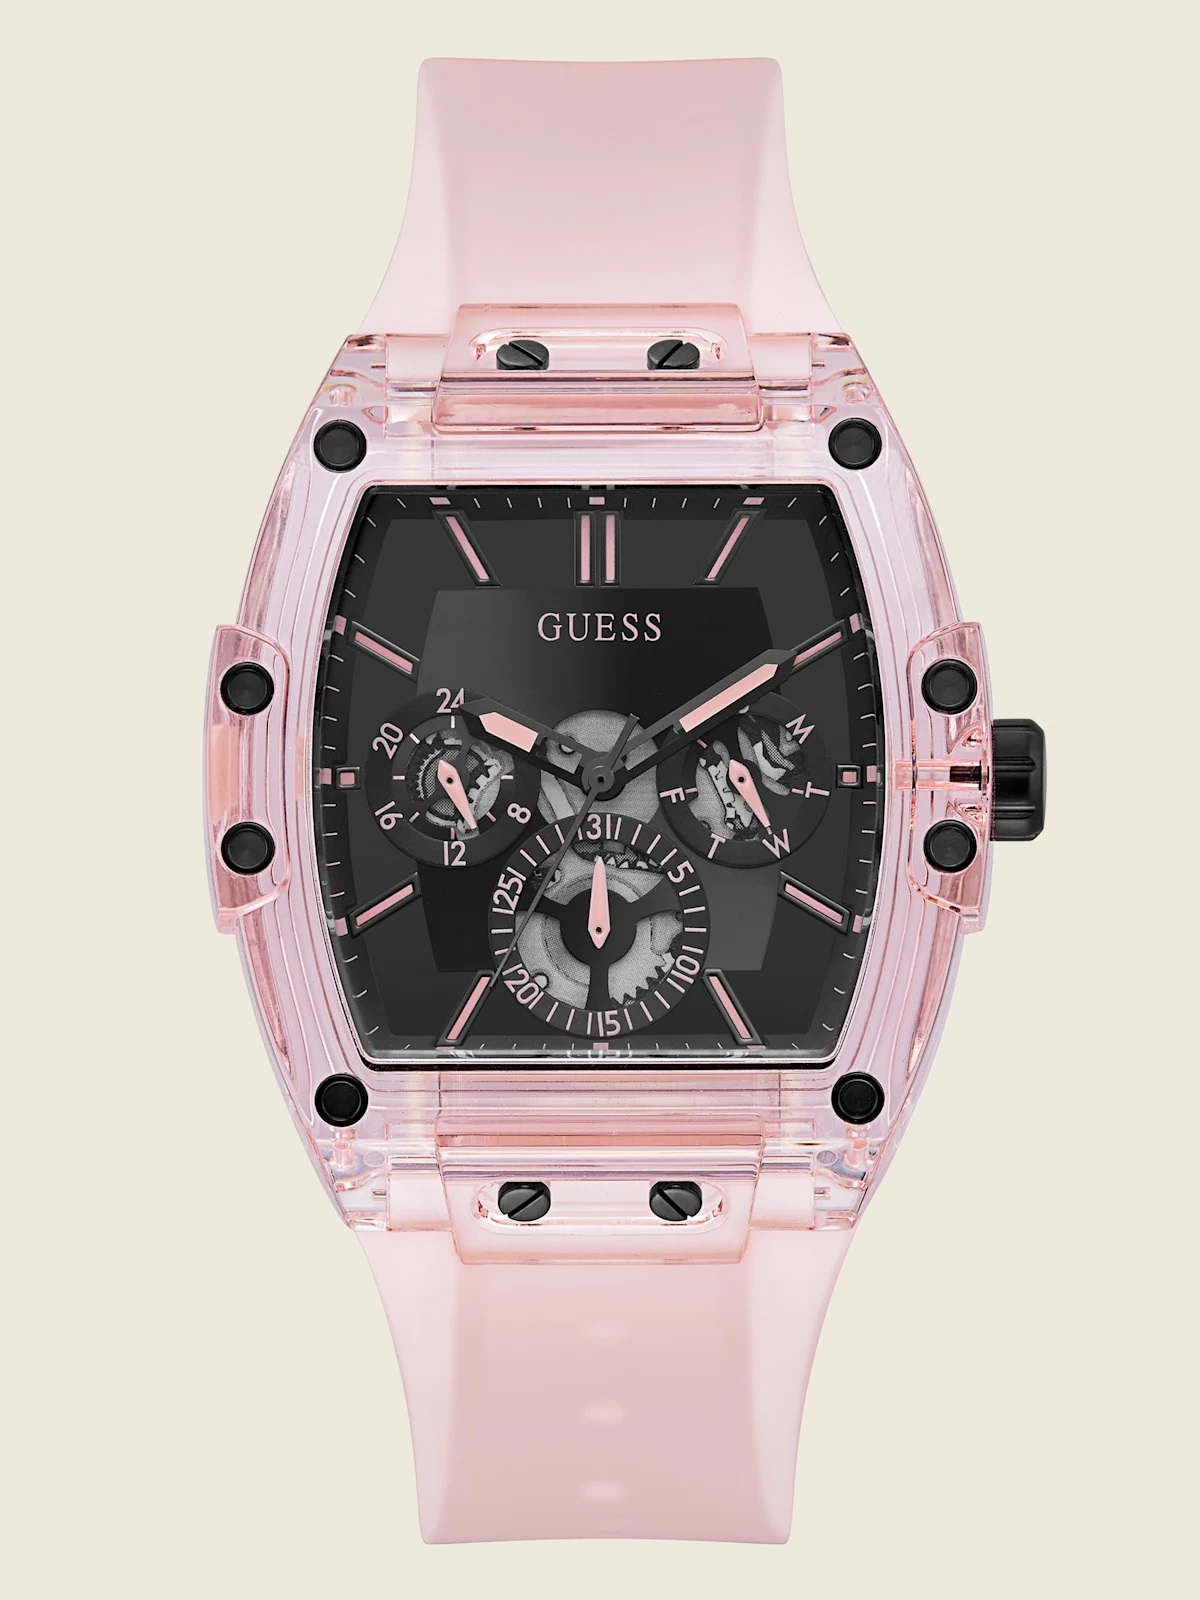 ĐỒNG HỒ GUESS PINK MULTIFUNCTION WATCH GW0203G11 11